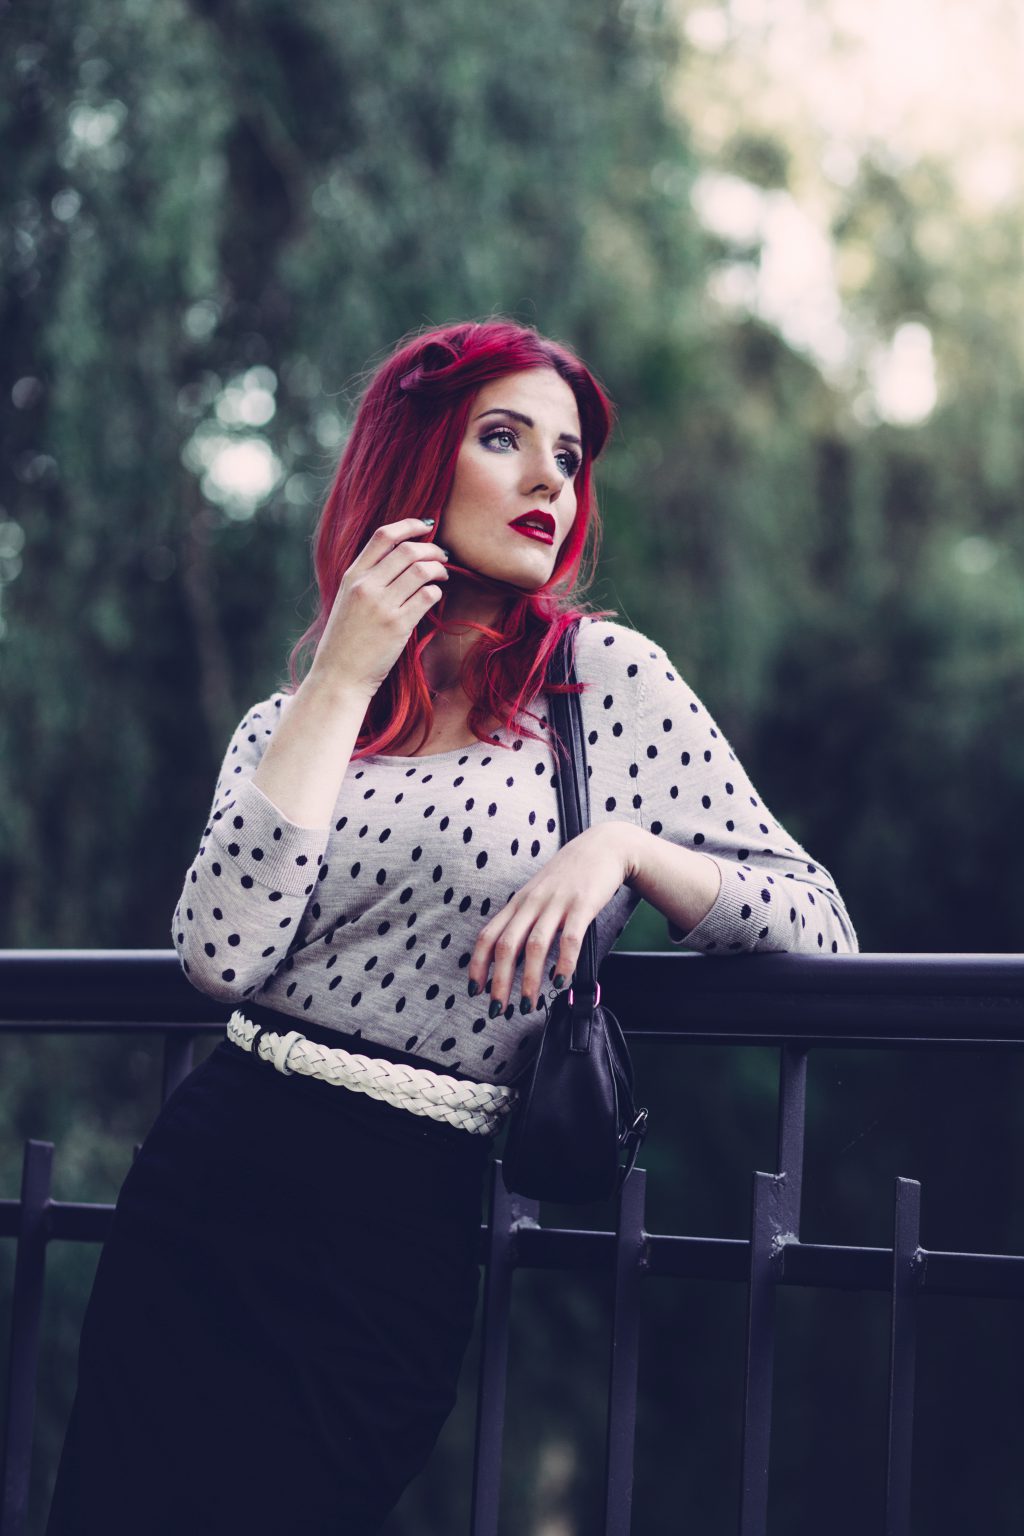 Retro style shoot in the park 4 - free stock photo